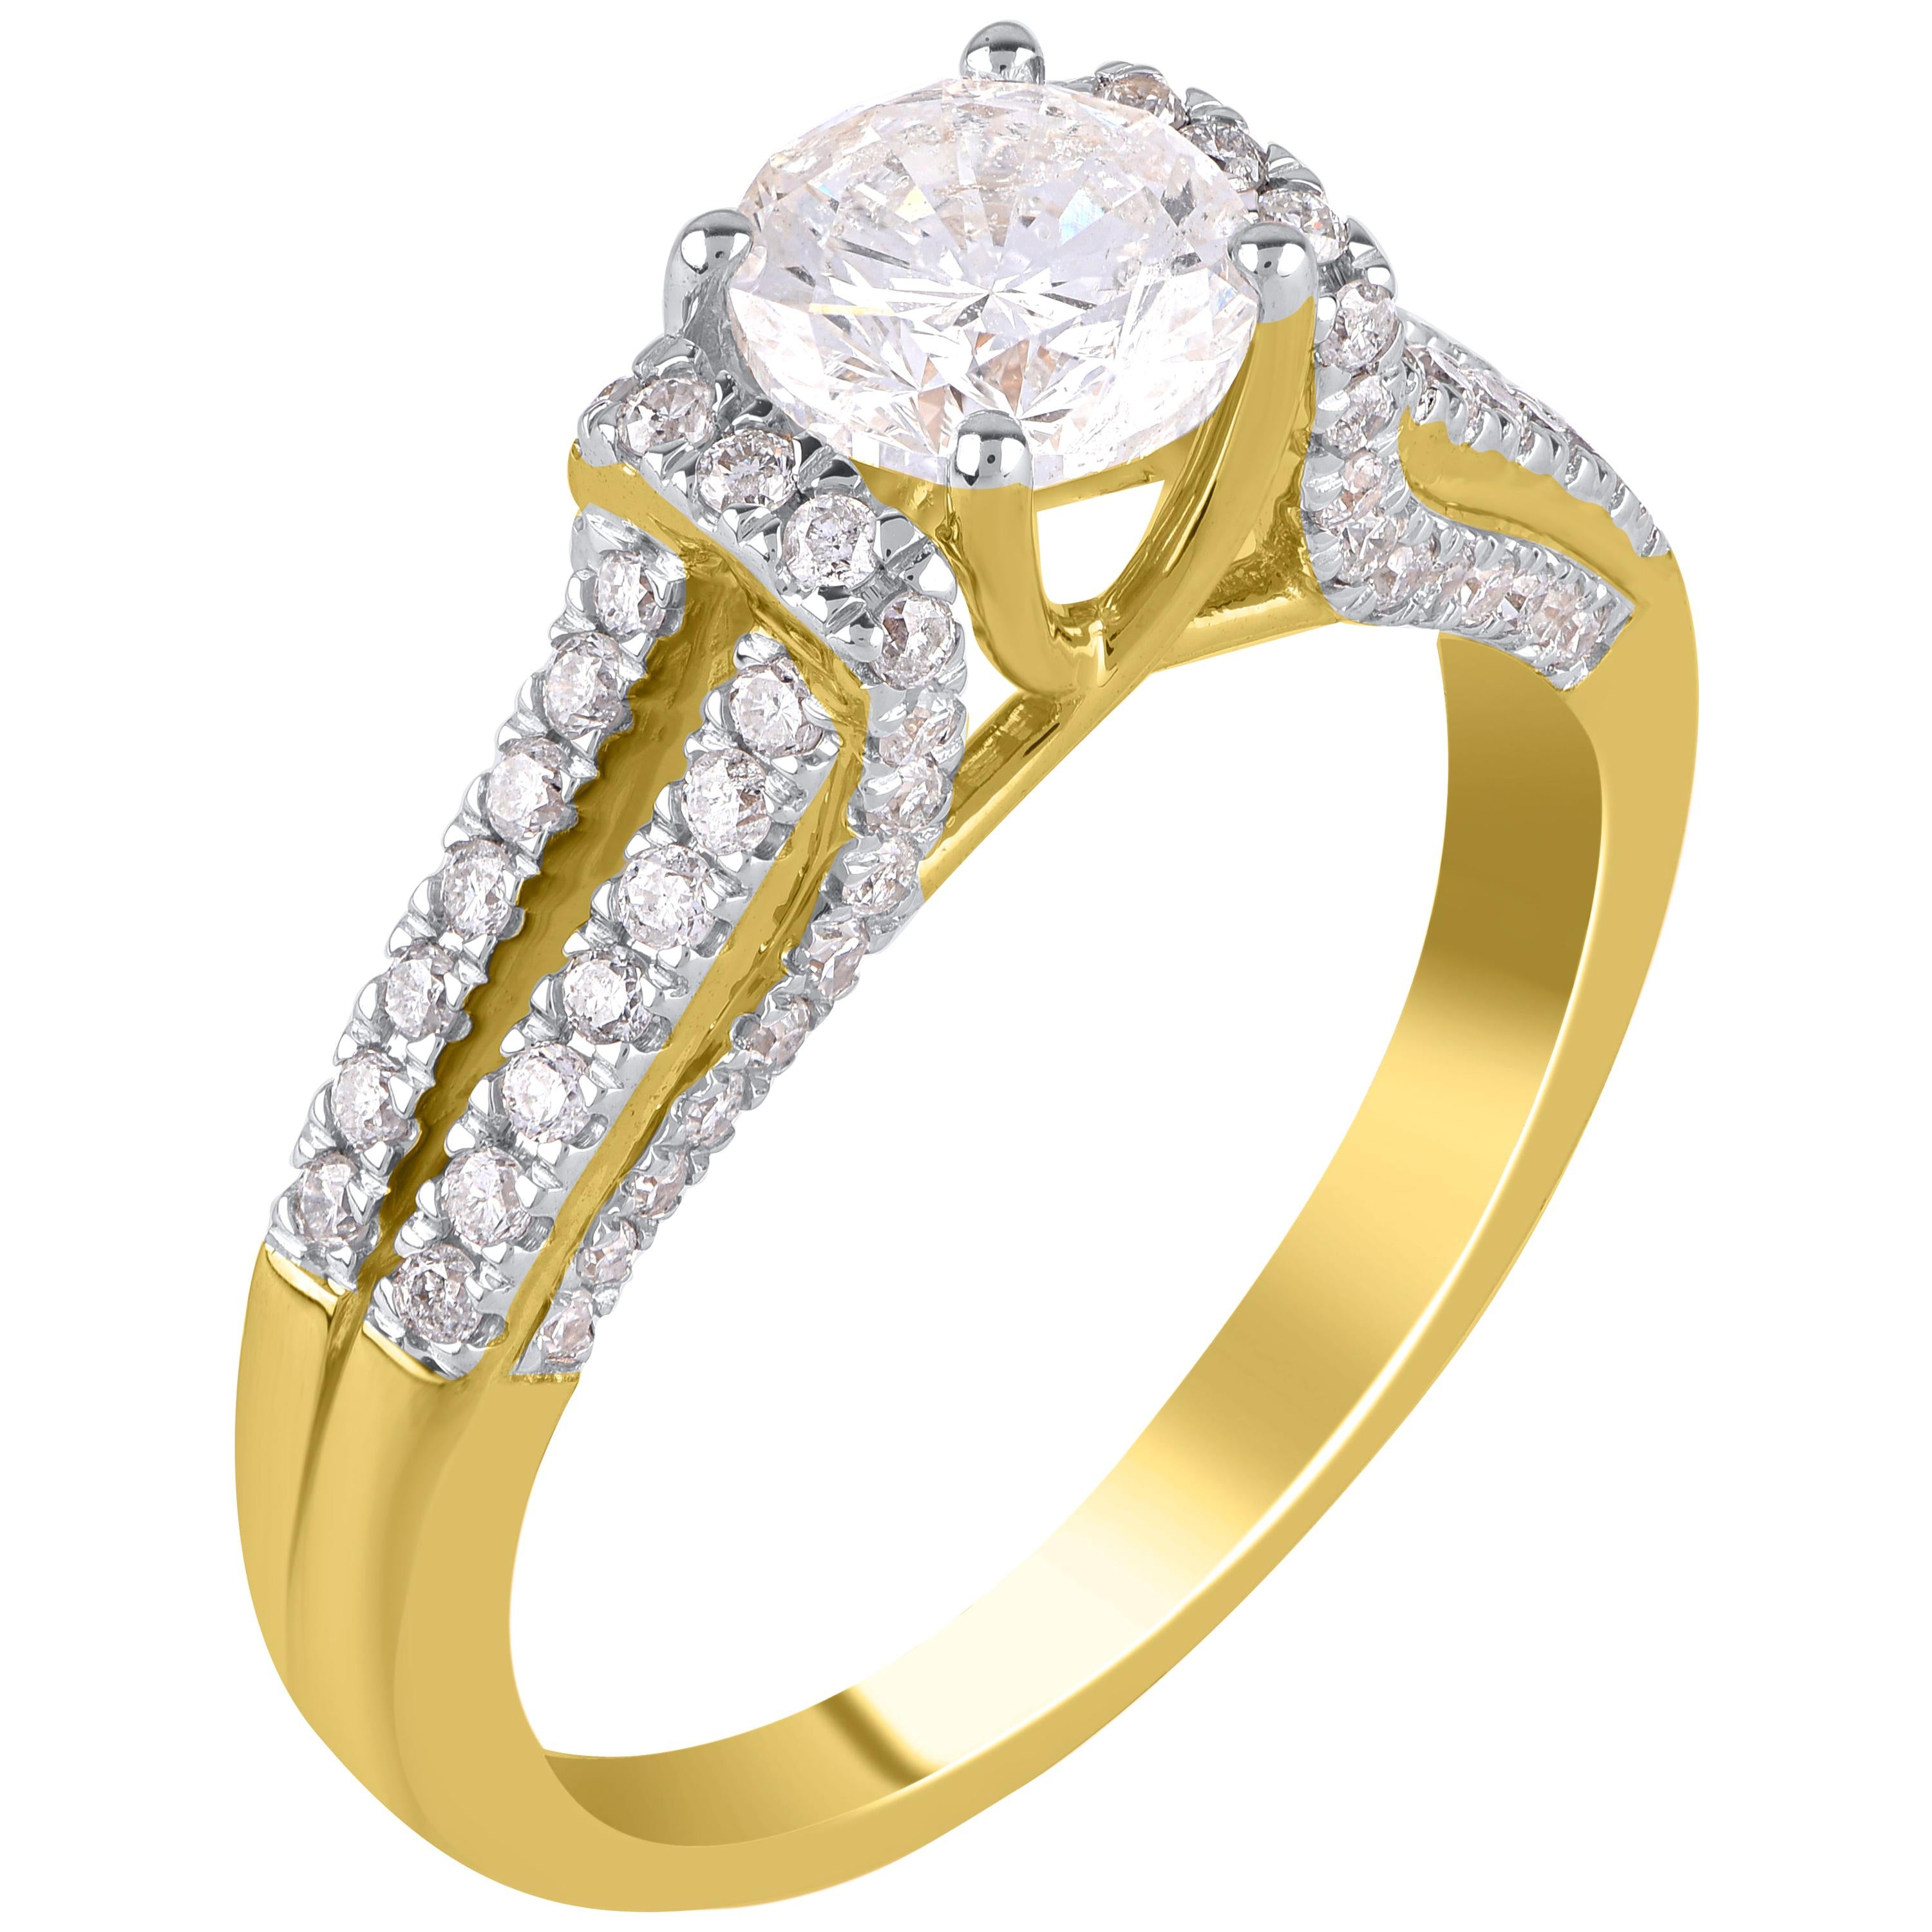 A gorgeous diamond split shank engagement ring, crafted in 18 KT yellow gold. This split shank ring is studded with 75 round-cut diamonds in prong and micro-prong setting, and diamonds are graded GH Color, SI1 Clarity.
